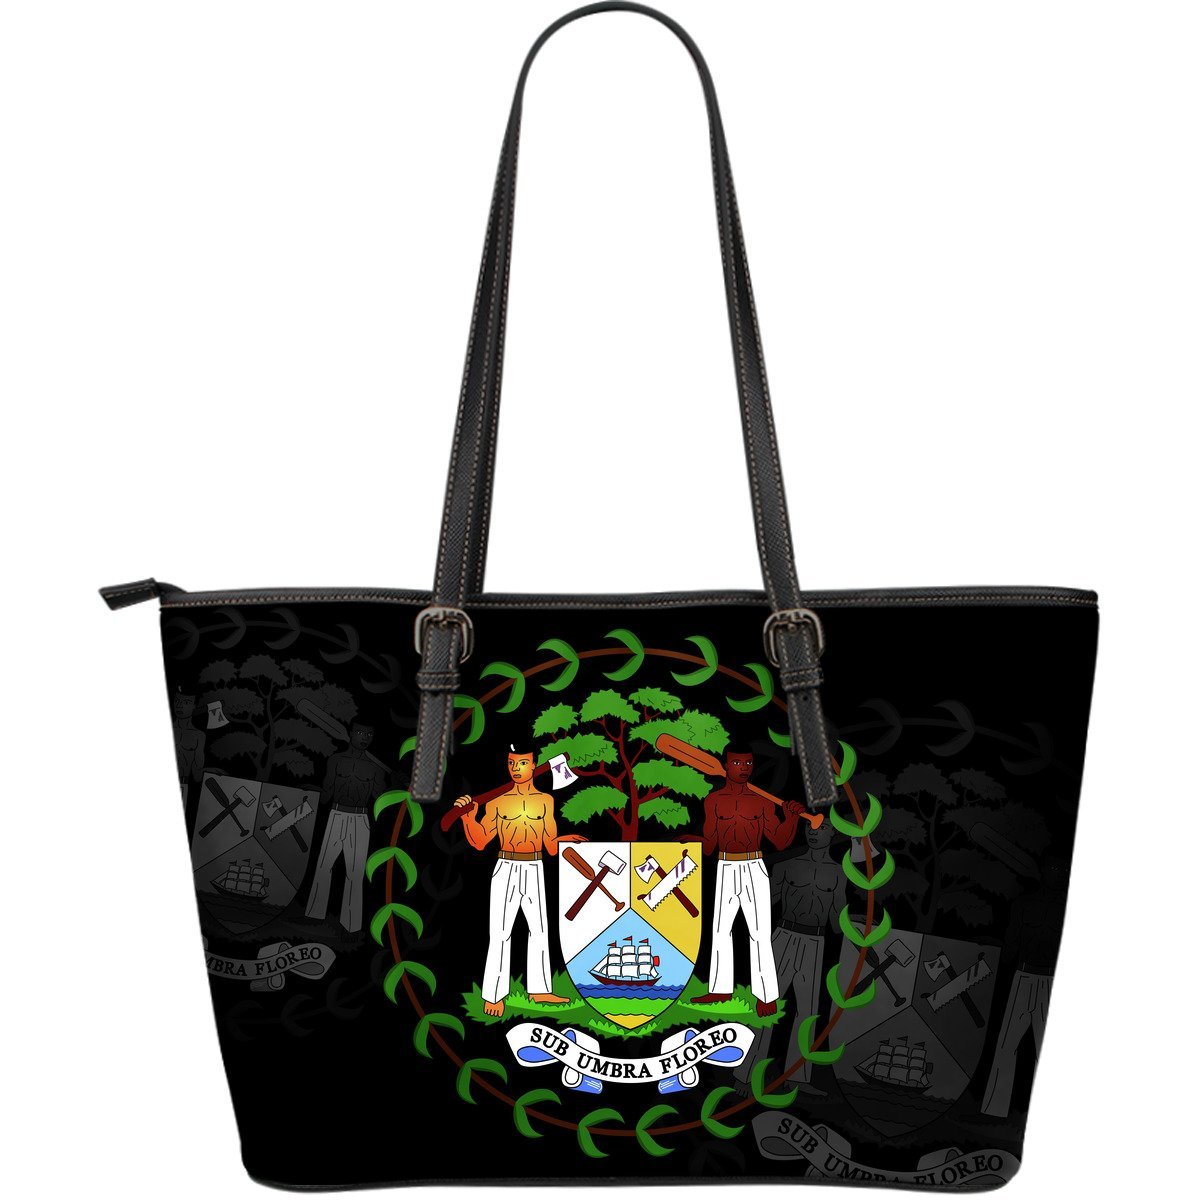 belize-leather-tote-bag-large-size